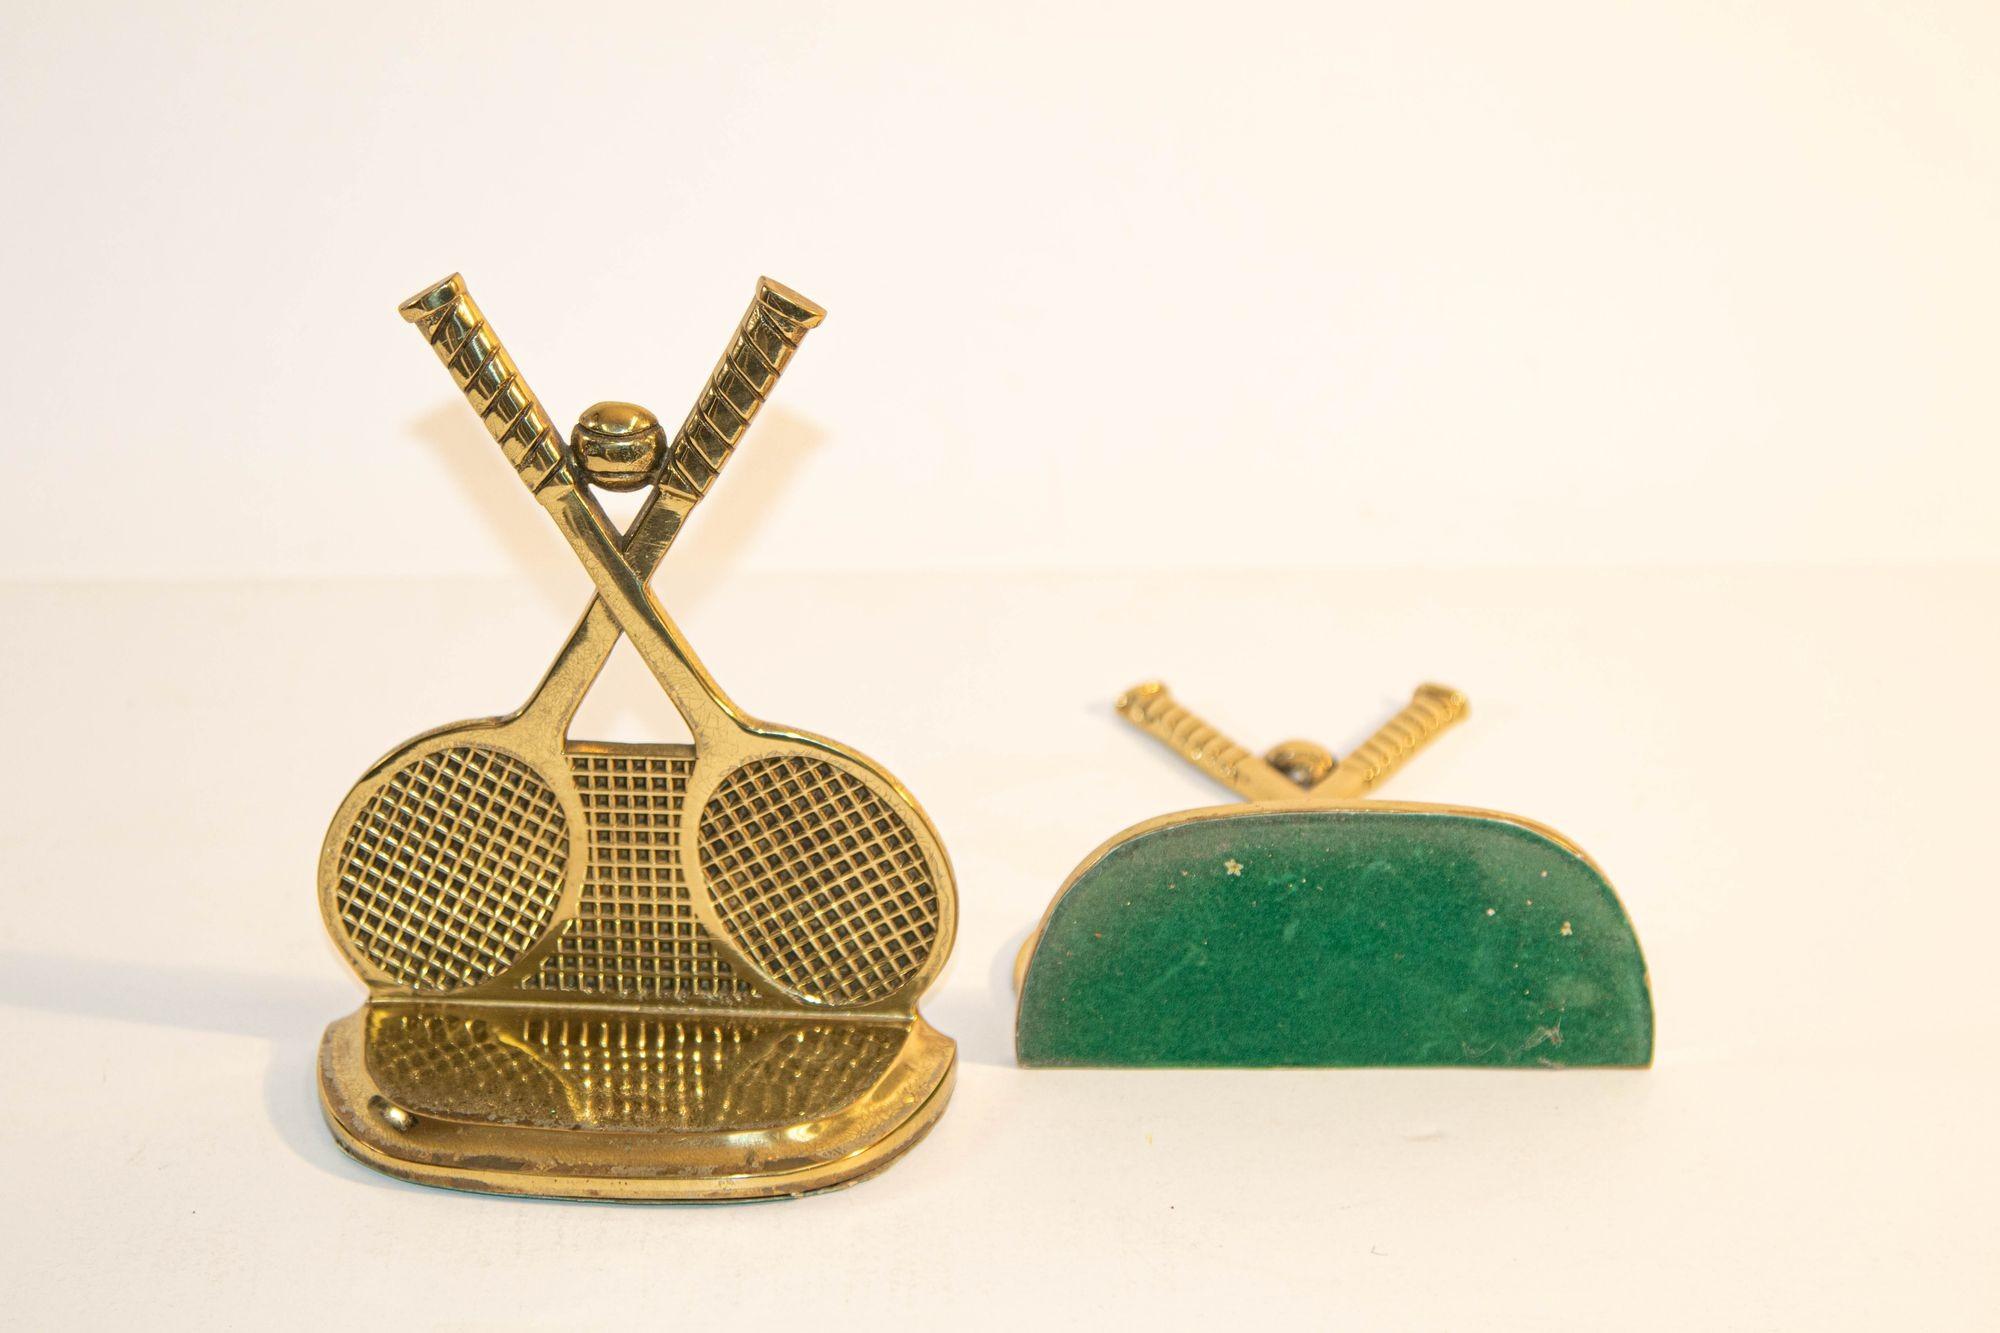 Pair of Vintage Brass Tennis Racket and Ball Bookends 1